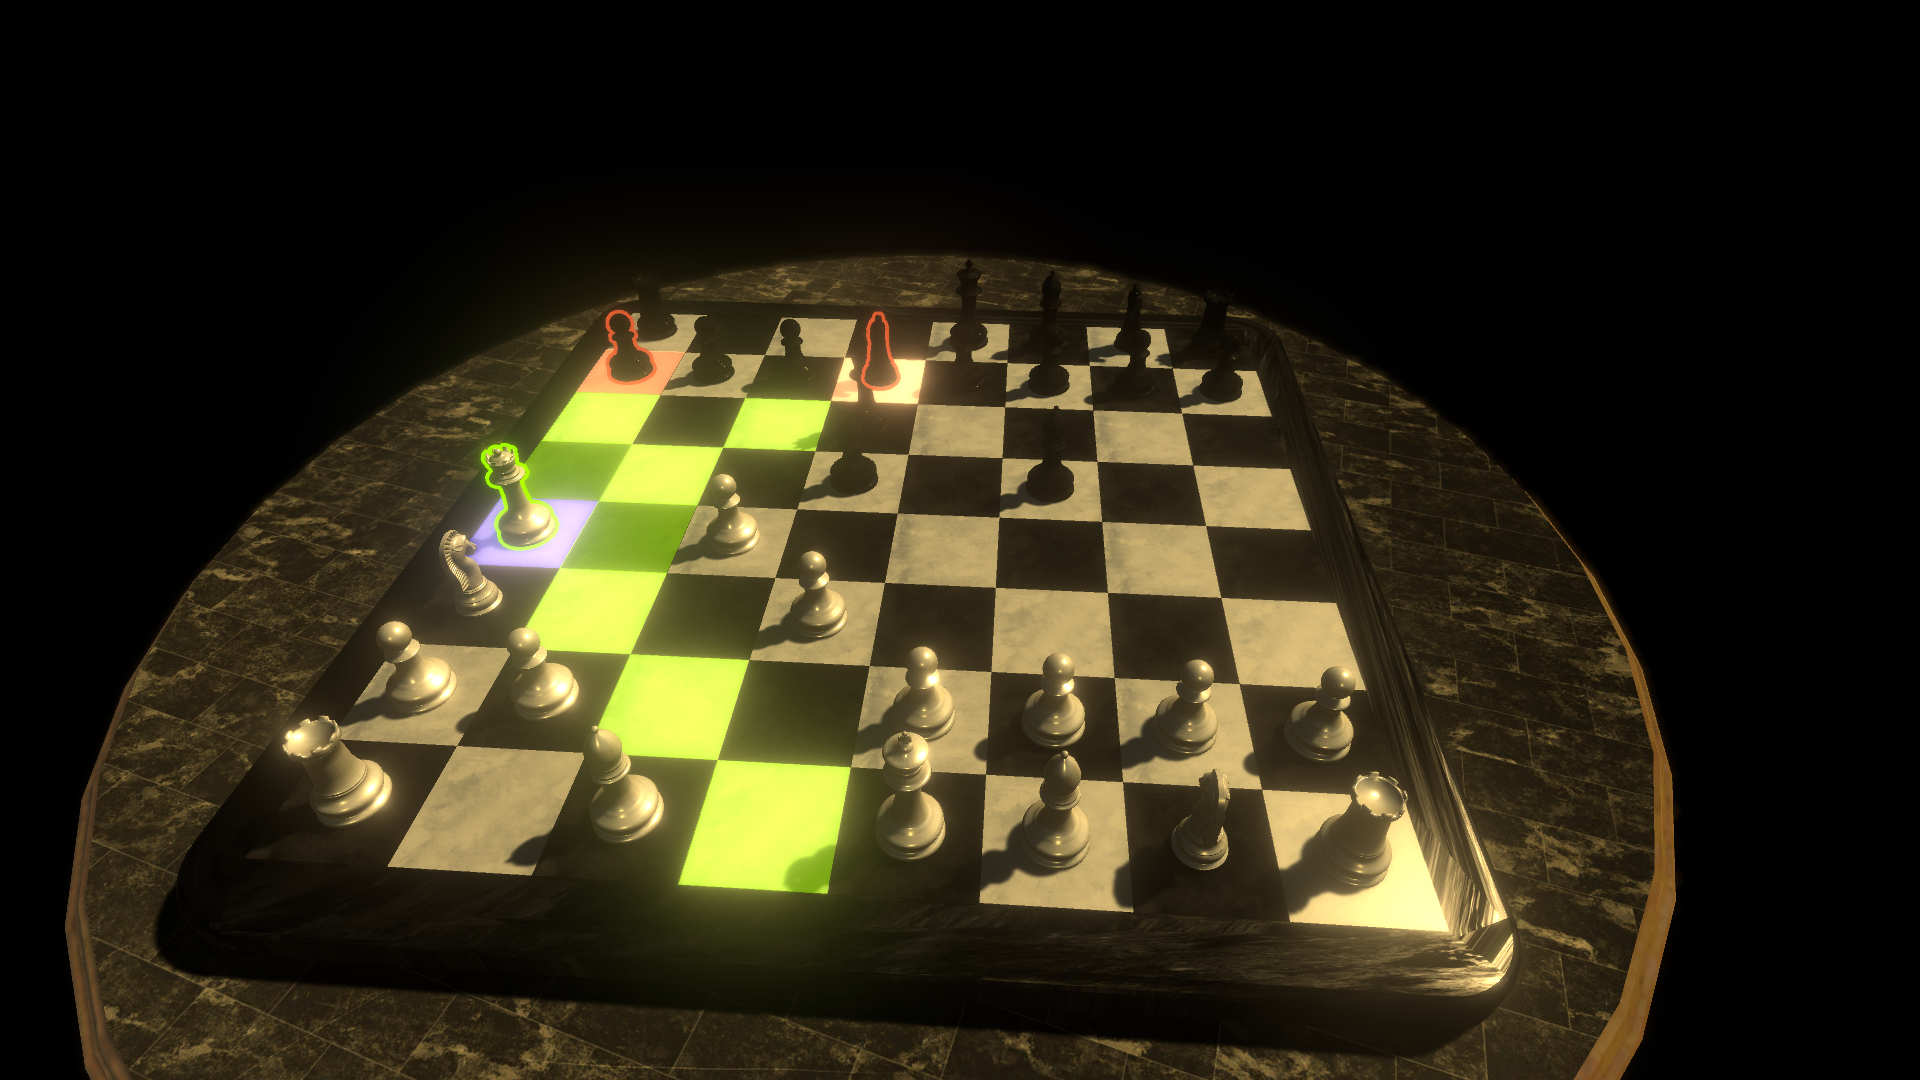 Chess Online Multiplayer for android instal